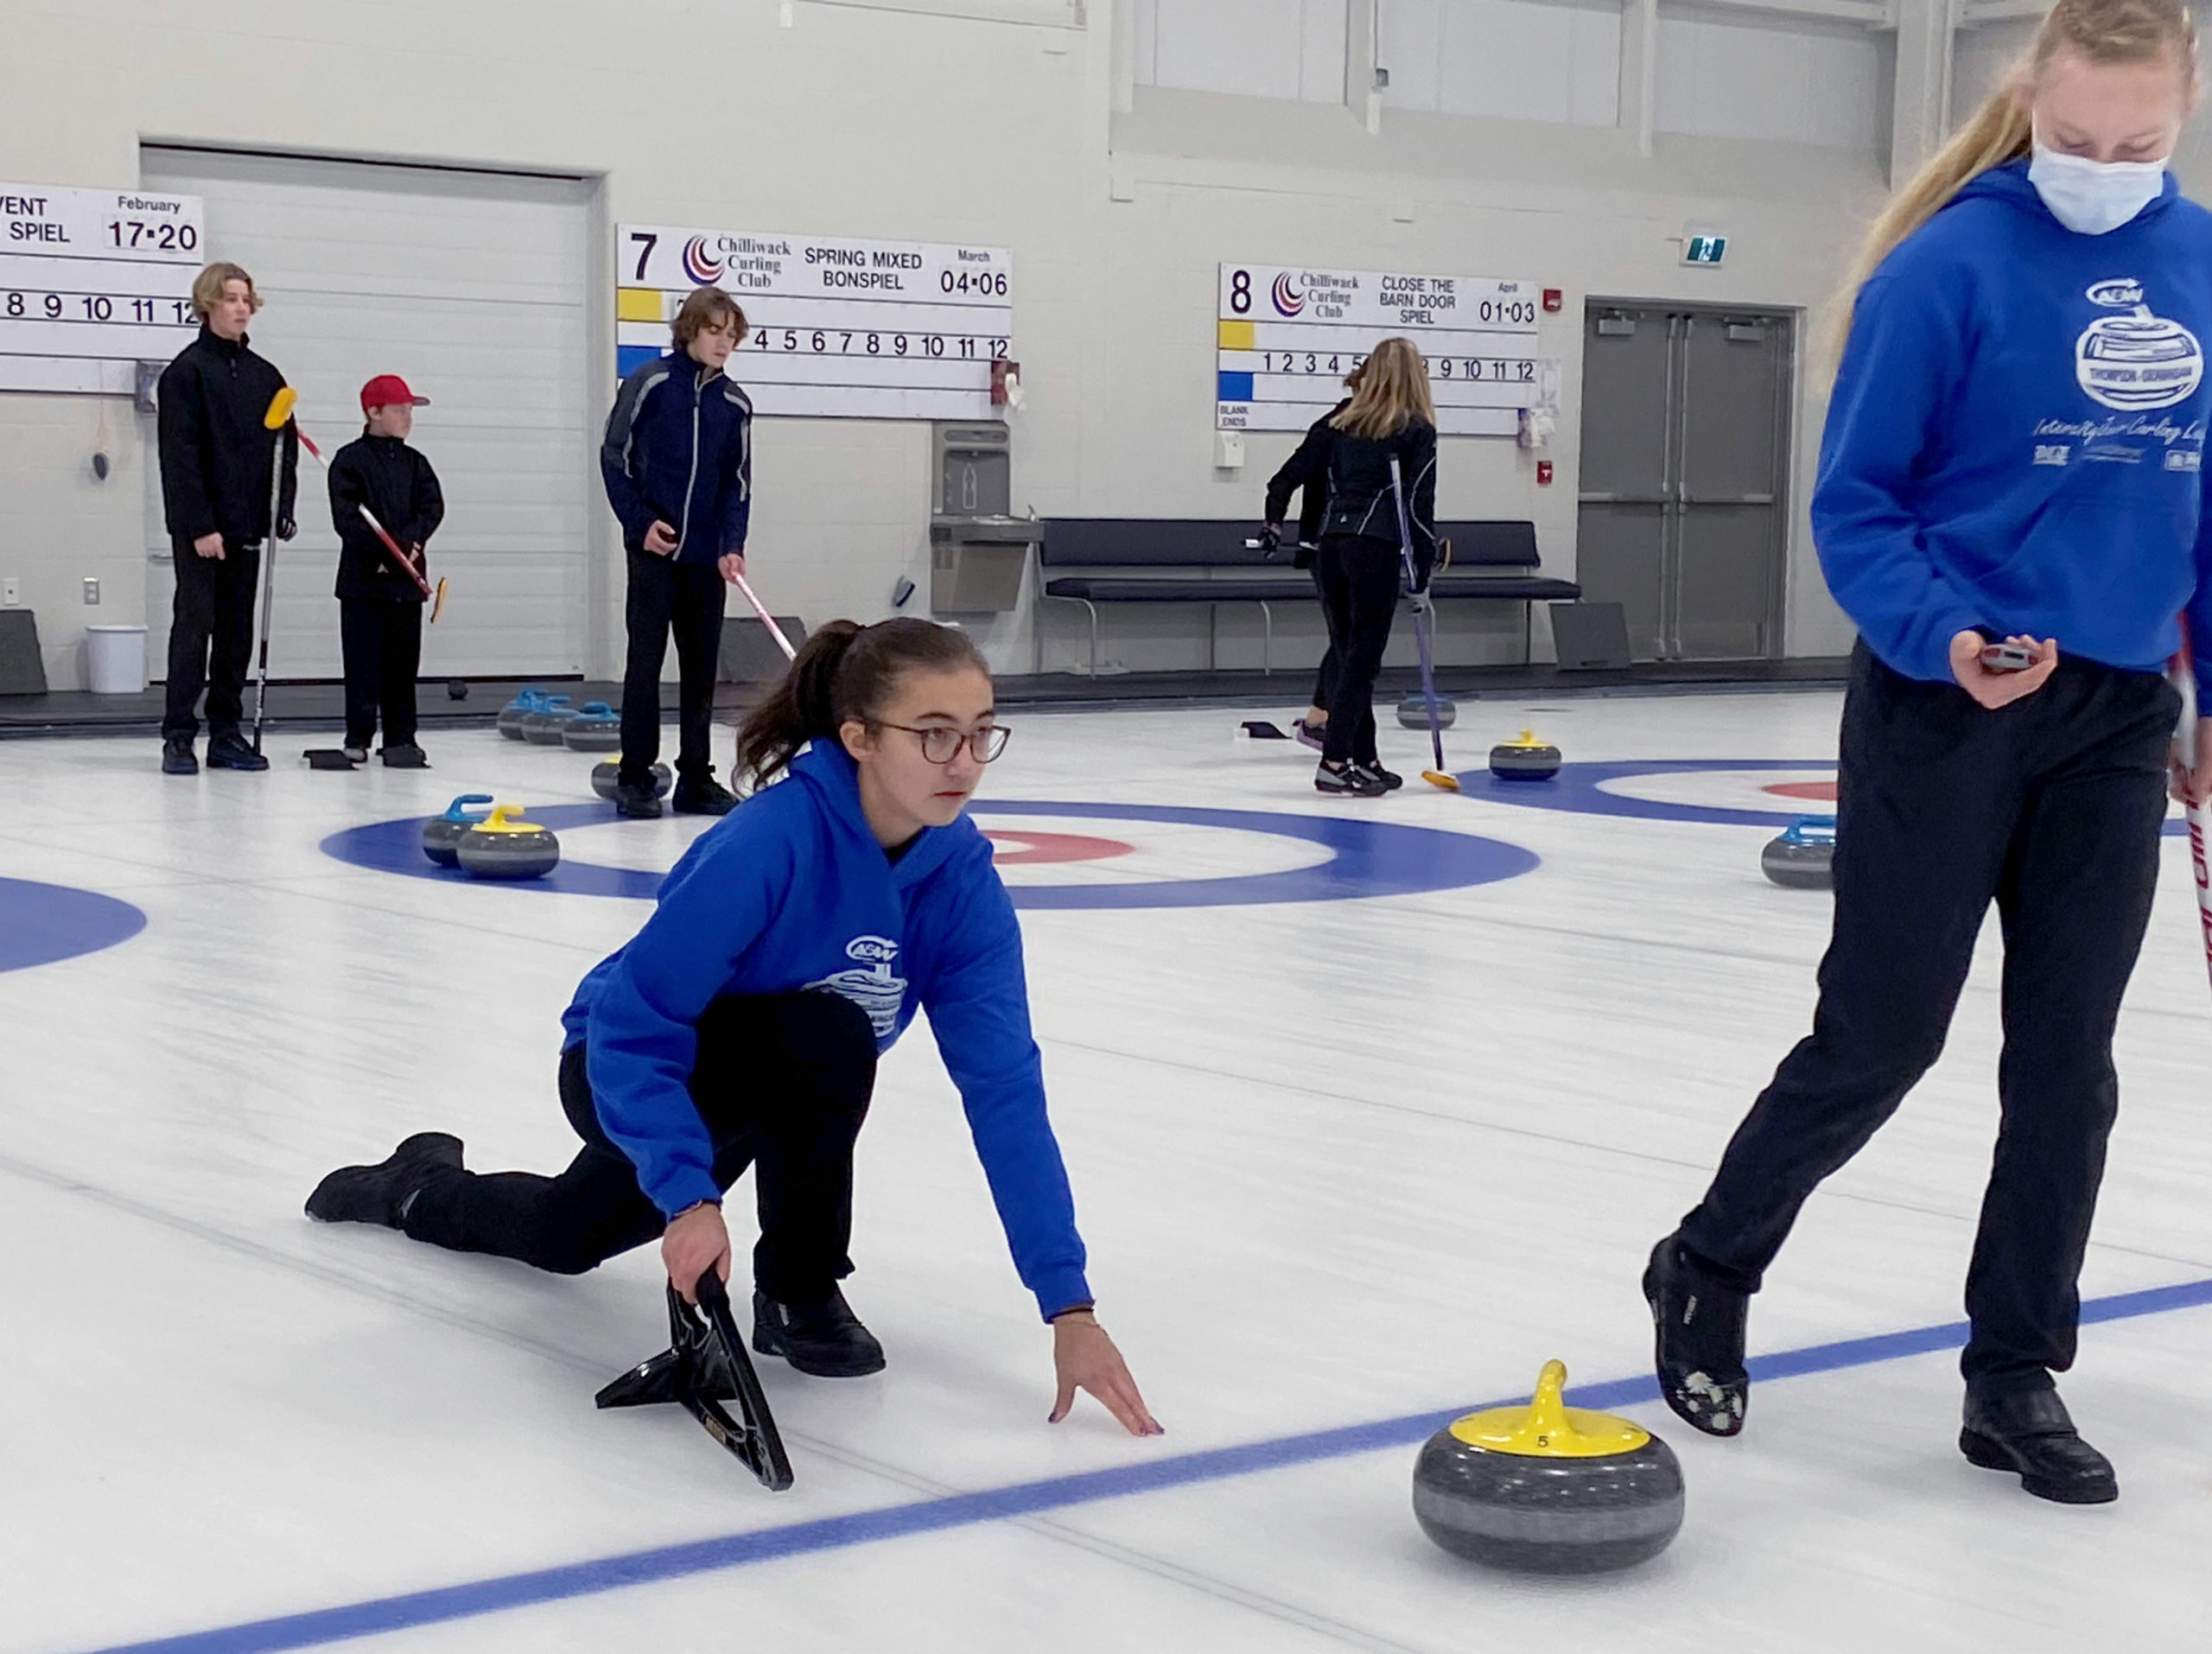 This week’s zone qualifiers set the stage for curling in the 2022 BC